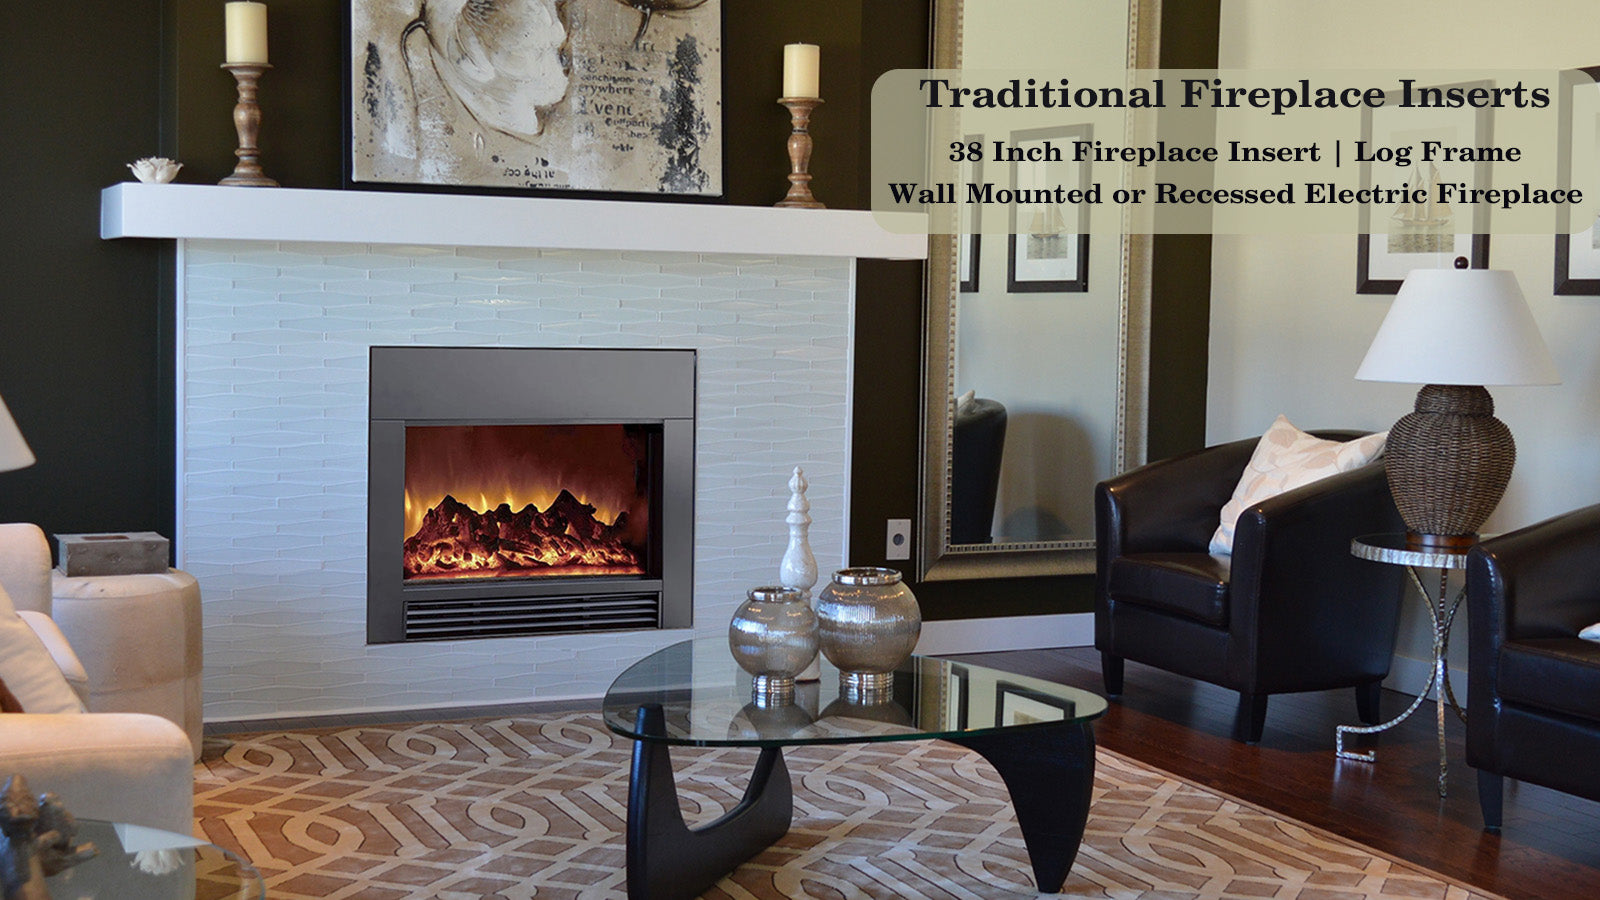 Zopaflame 38 inch traditional fireplace insert for livingroom